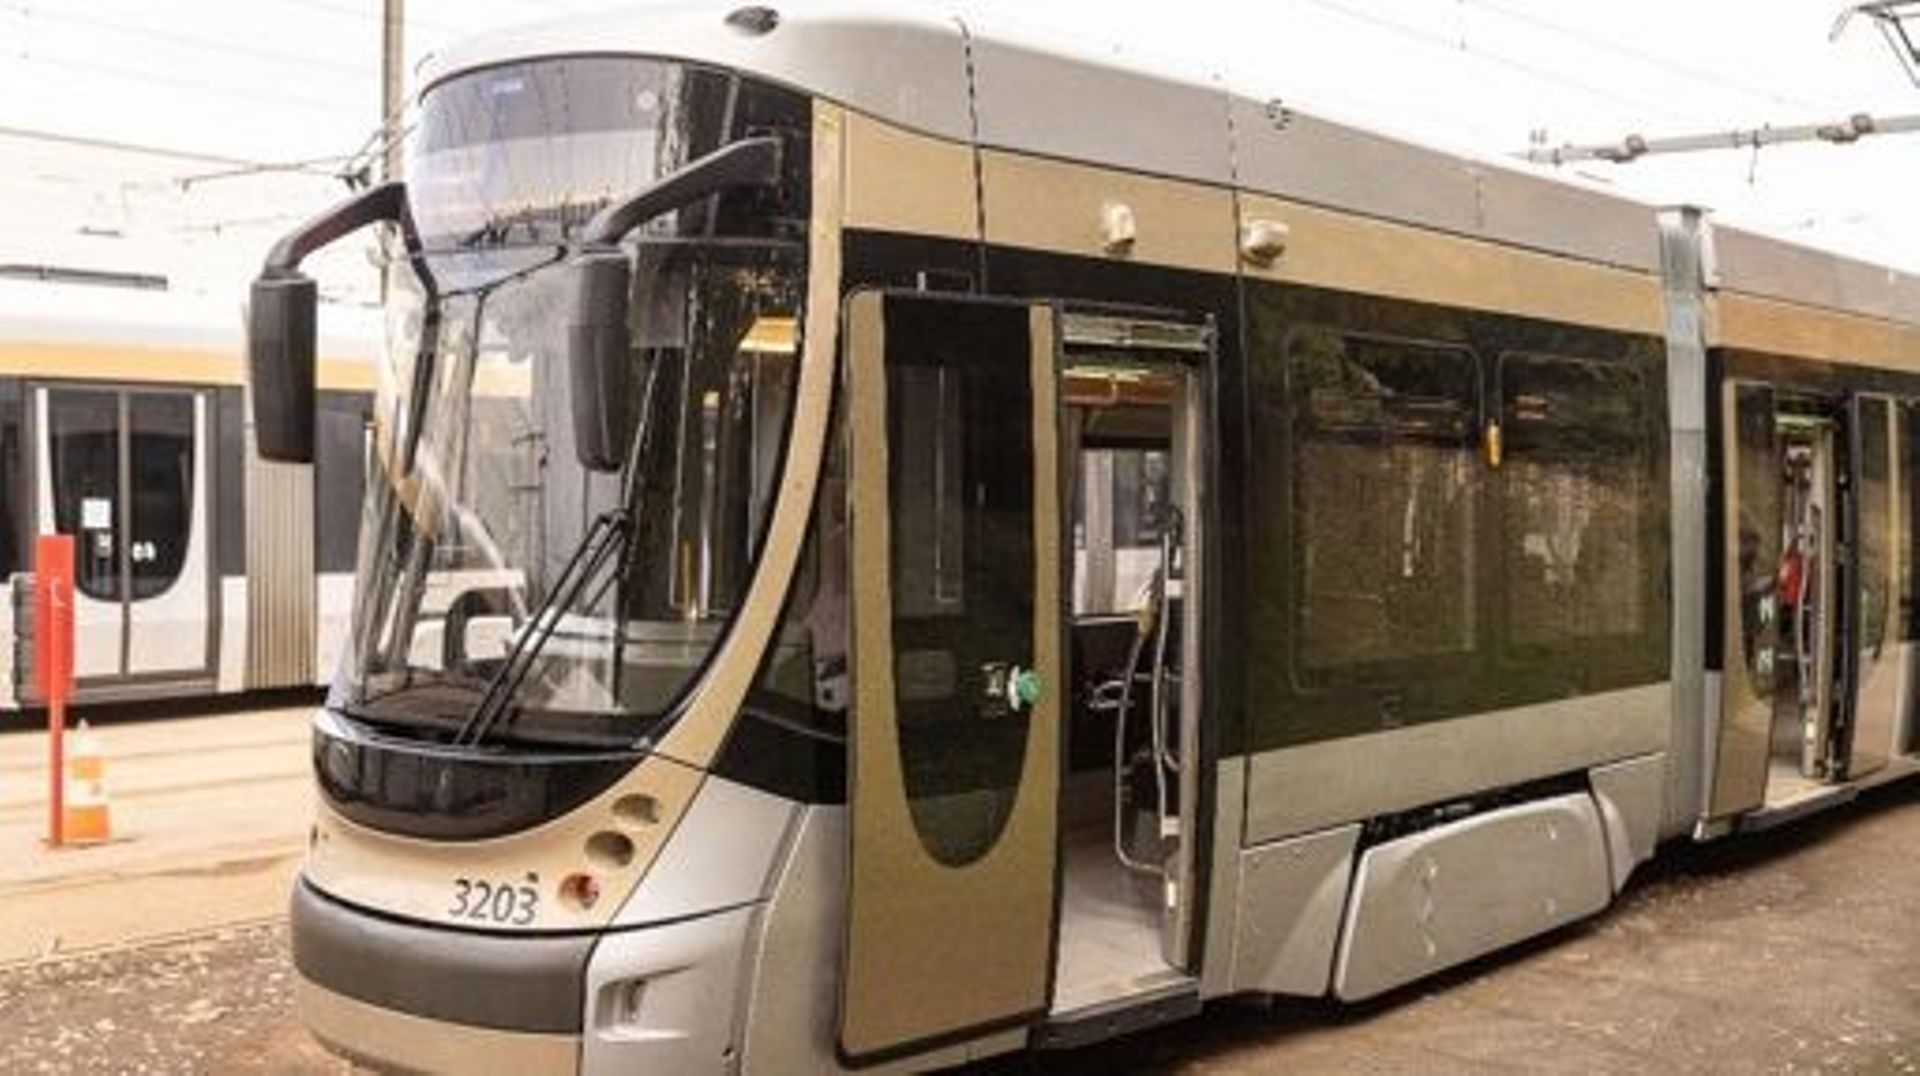 Illustration picture shows the presentation of the 'new generation of trams' of Brussels public transport company MIVB - STIB, Monday 25 October 2021 in Brussels. BELGA PHOTO JAMES ARTHUR GEKIERE